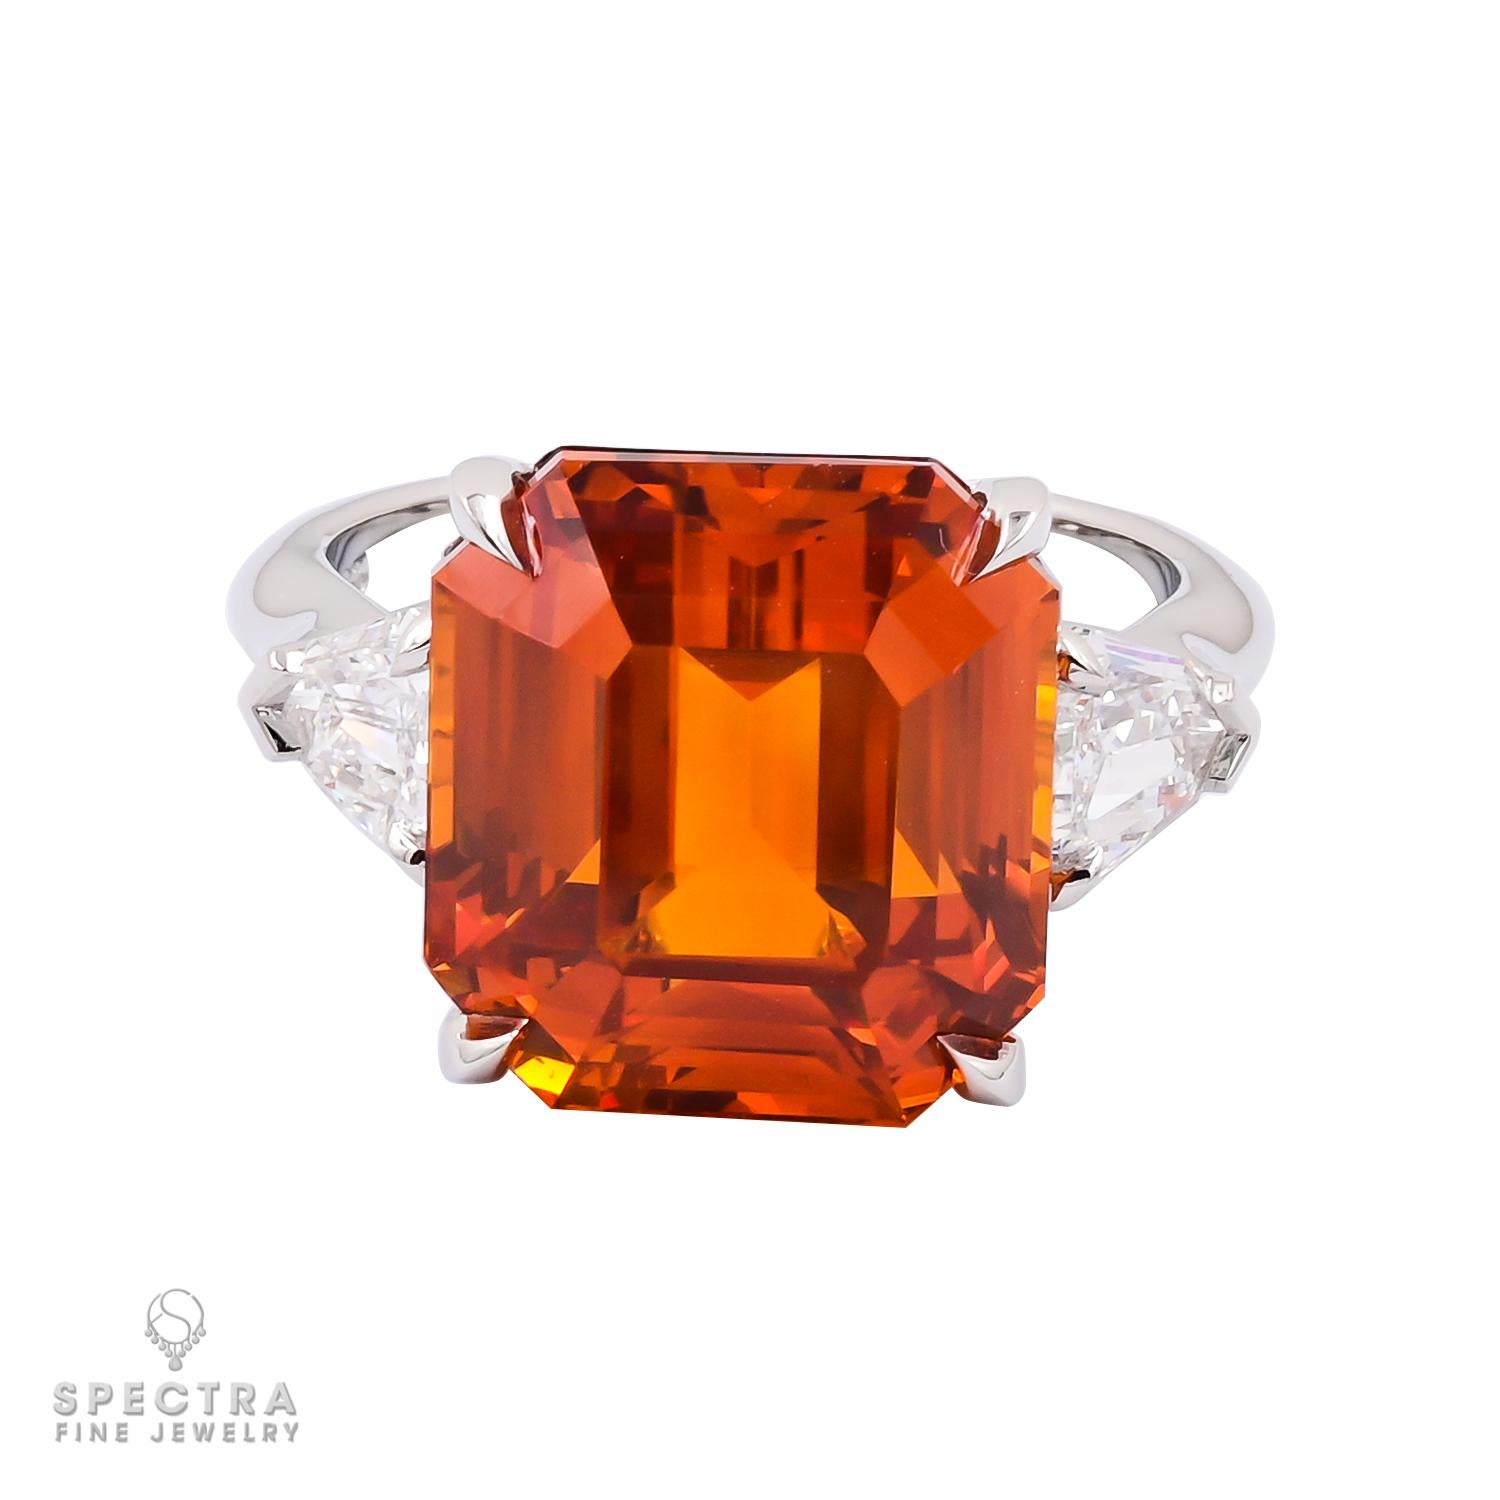 This breathtaking Cocktail Ring feature a magnificent emerald-cut orange sapphire at its center. Weighing an impressive 13.06 carats, this gemstone commands attention with its vivid hue and remarkable clarity.

Certified by the prestigious